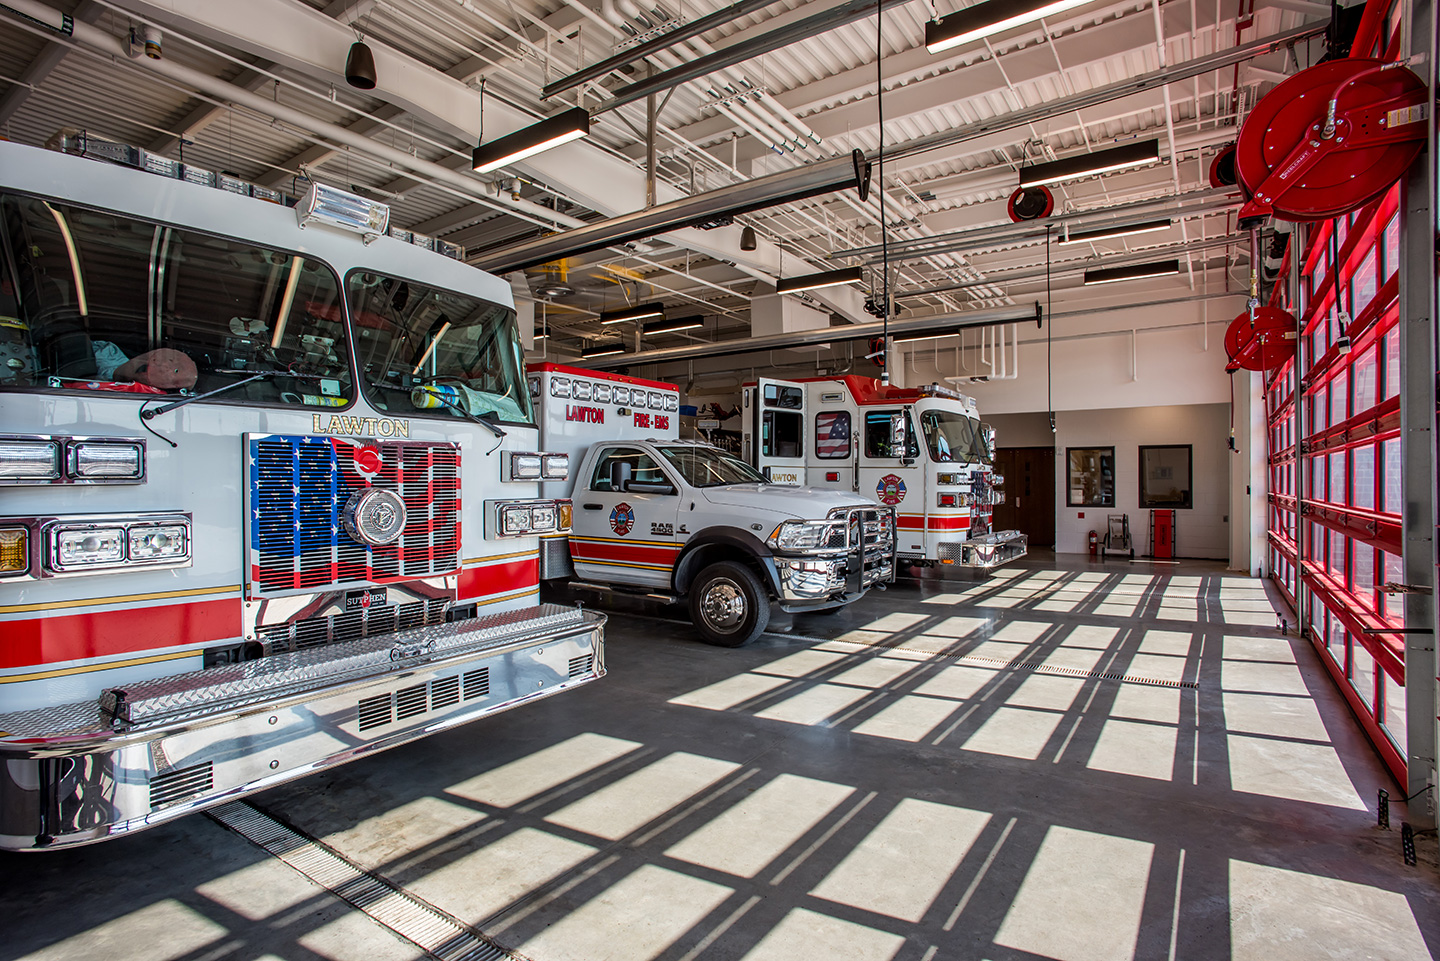 Fire Station Number One is programmed for an operational three-bay facility, including all support areas for equipment and fire operations. Areas for fire training, living, and bunk included.